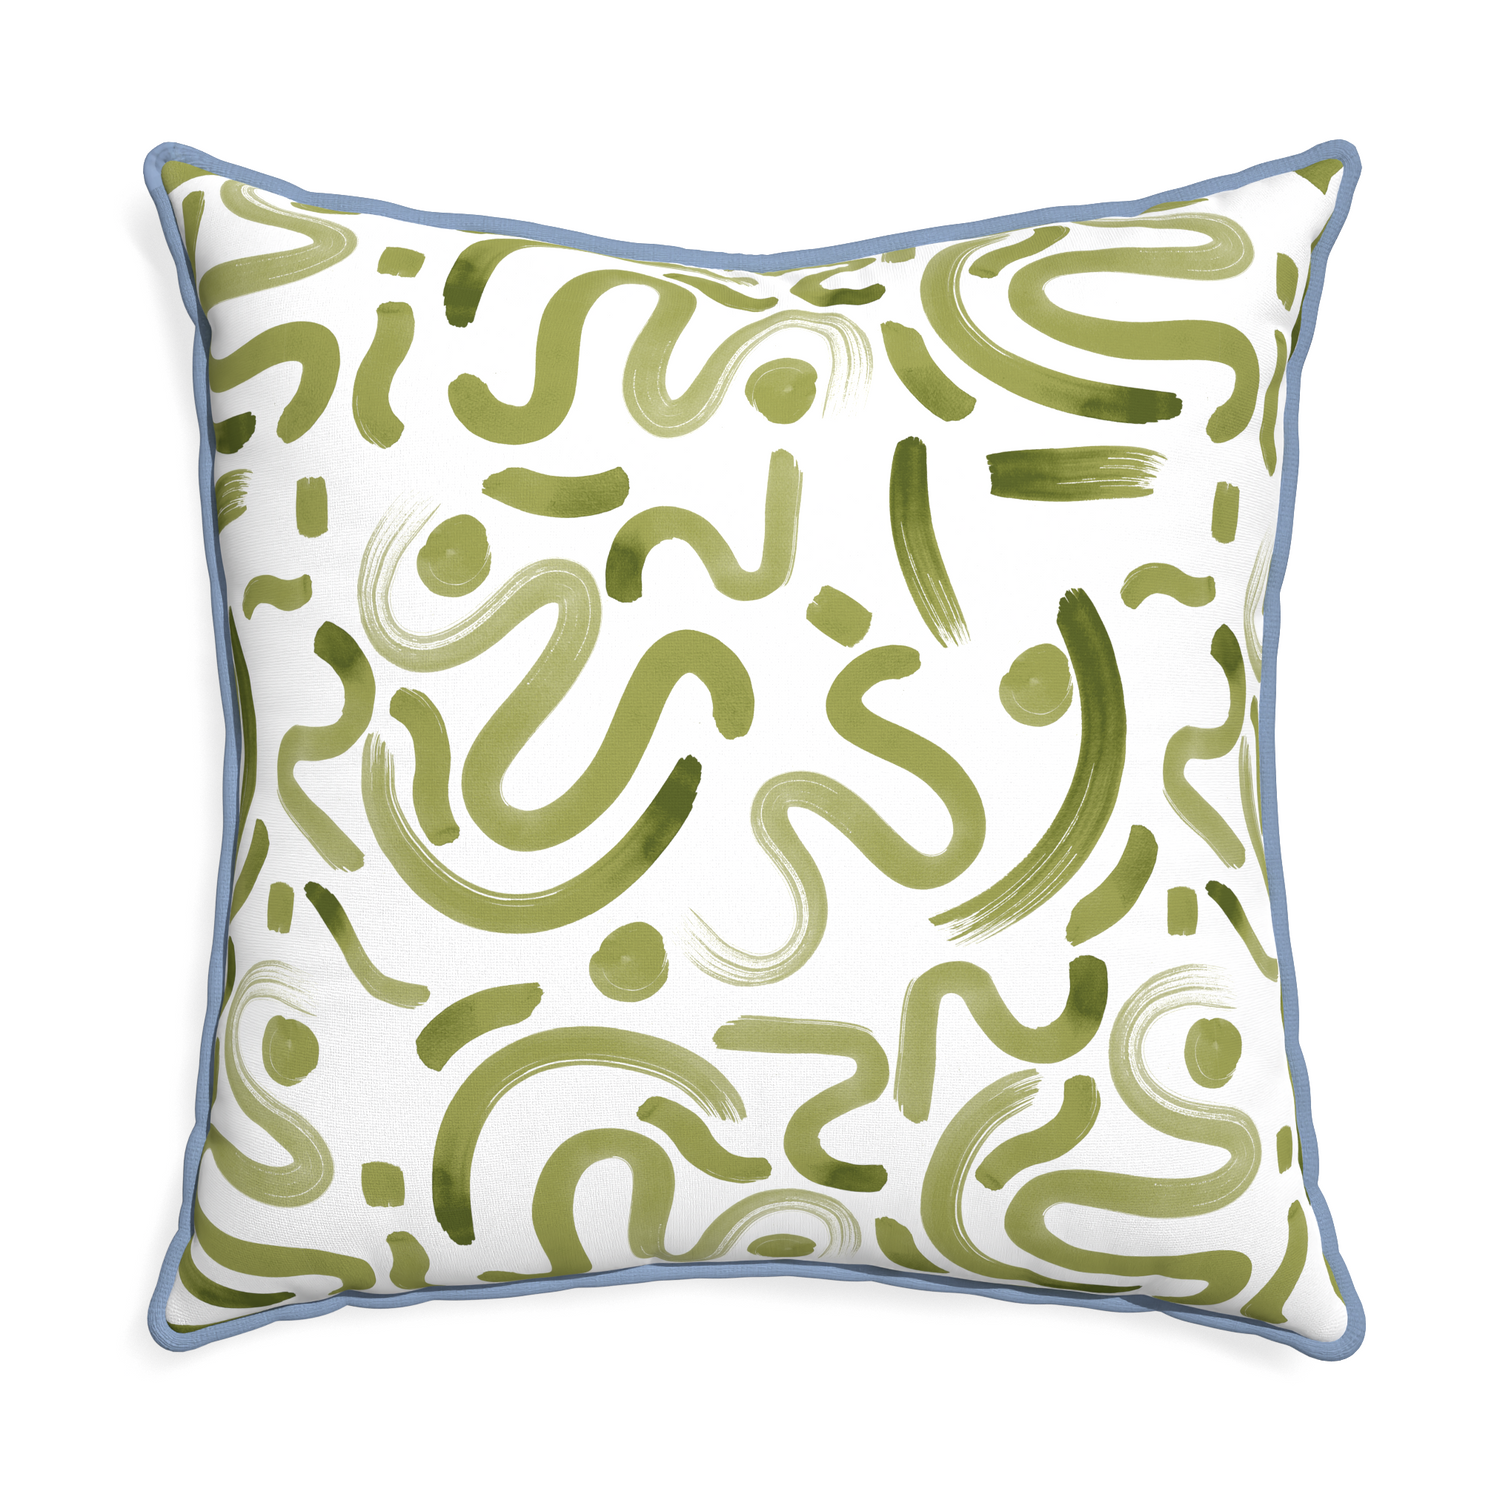 Euro-sham hockney moss custom pillow with sky piping on white background